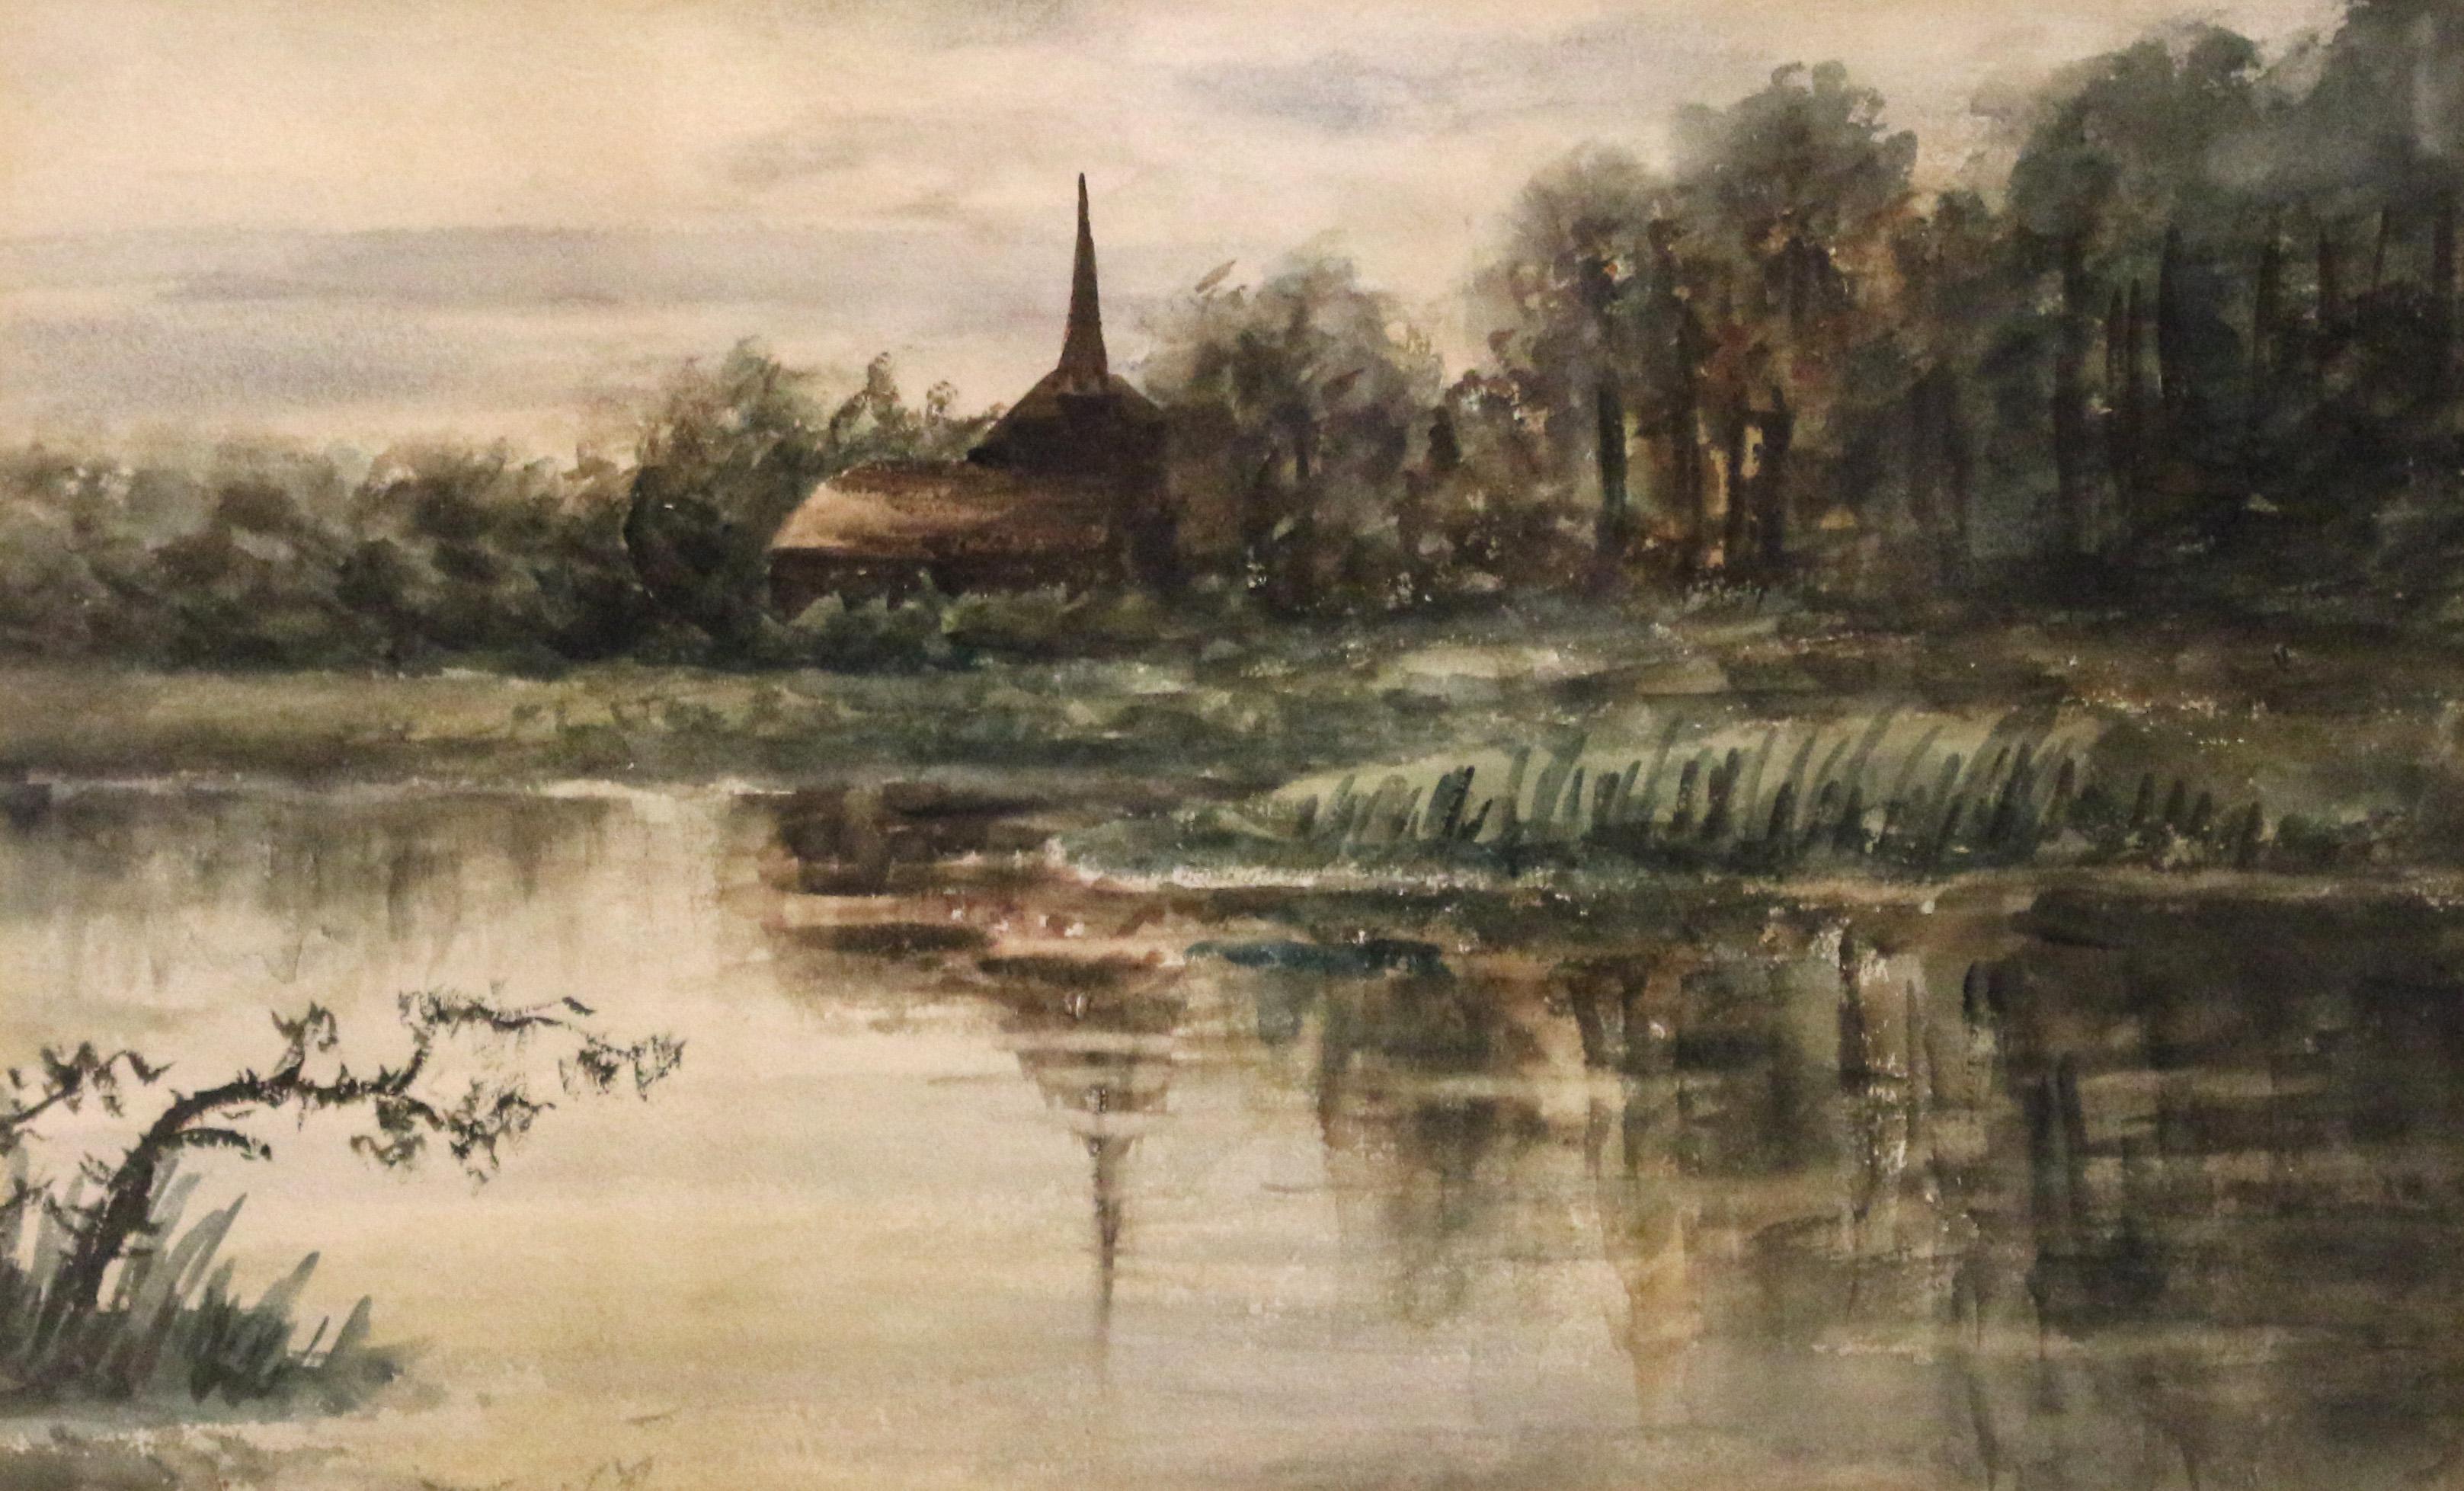 Framed, unsigned watercolor, likely European and late 19th century. In an old frame, but appears to have been more recently matted and backed. Charming lush water scene with a spired building reflected back in the water as well. Not examined out of